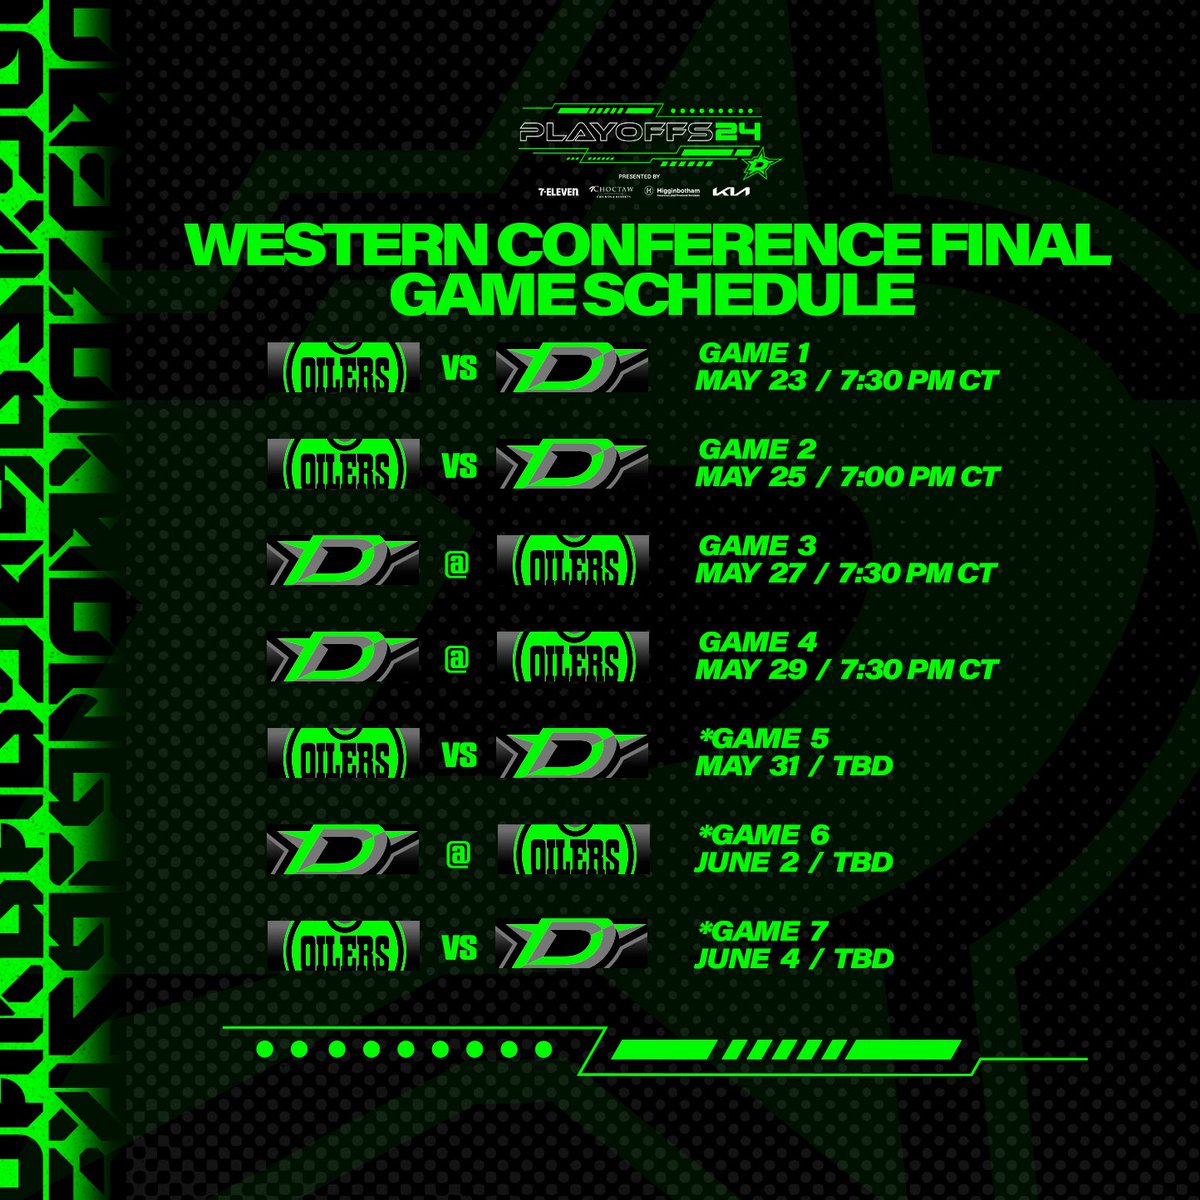 ⏰ WE'VE GOT GAME TIMES! ⏰

Times are set for games 1 through 4 of the Western Conference Final 🫡